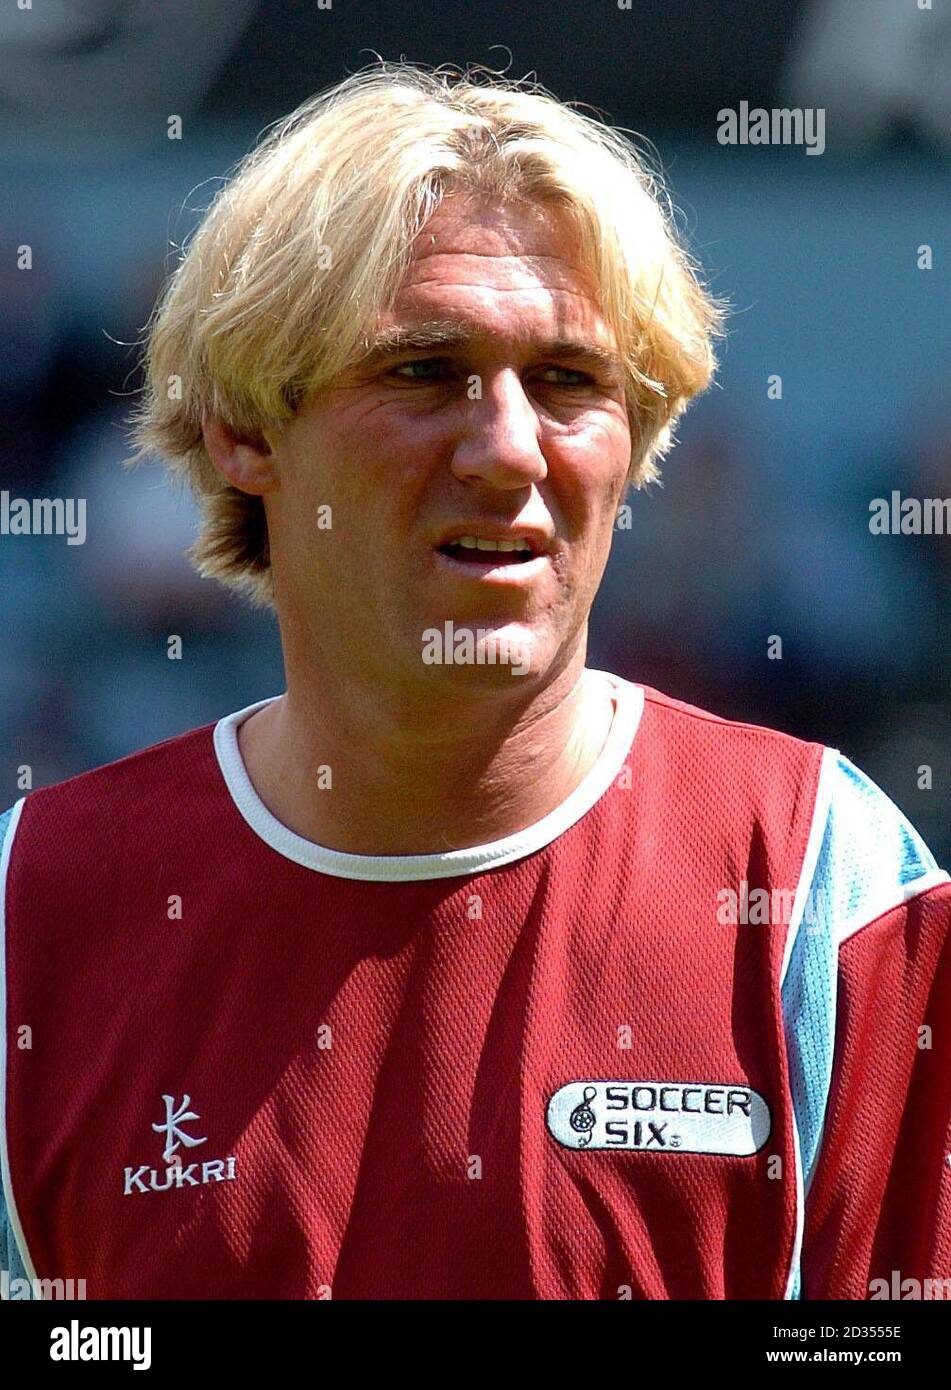 Simon Jordan, the owner of Crystal Palace Football Club at the Celebrity Soccer Sixes tournament in Upton Park, east London. Stock Photo